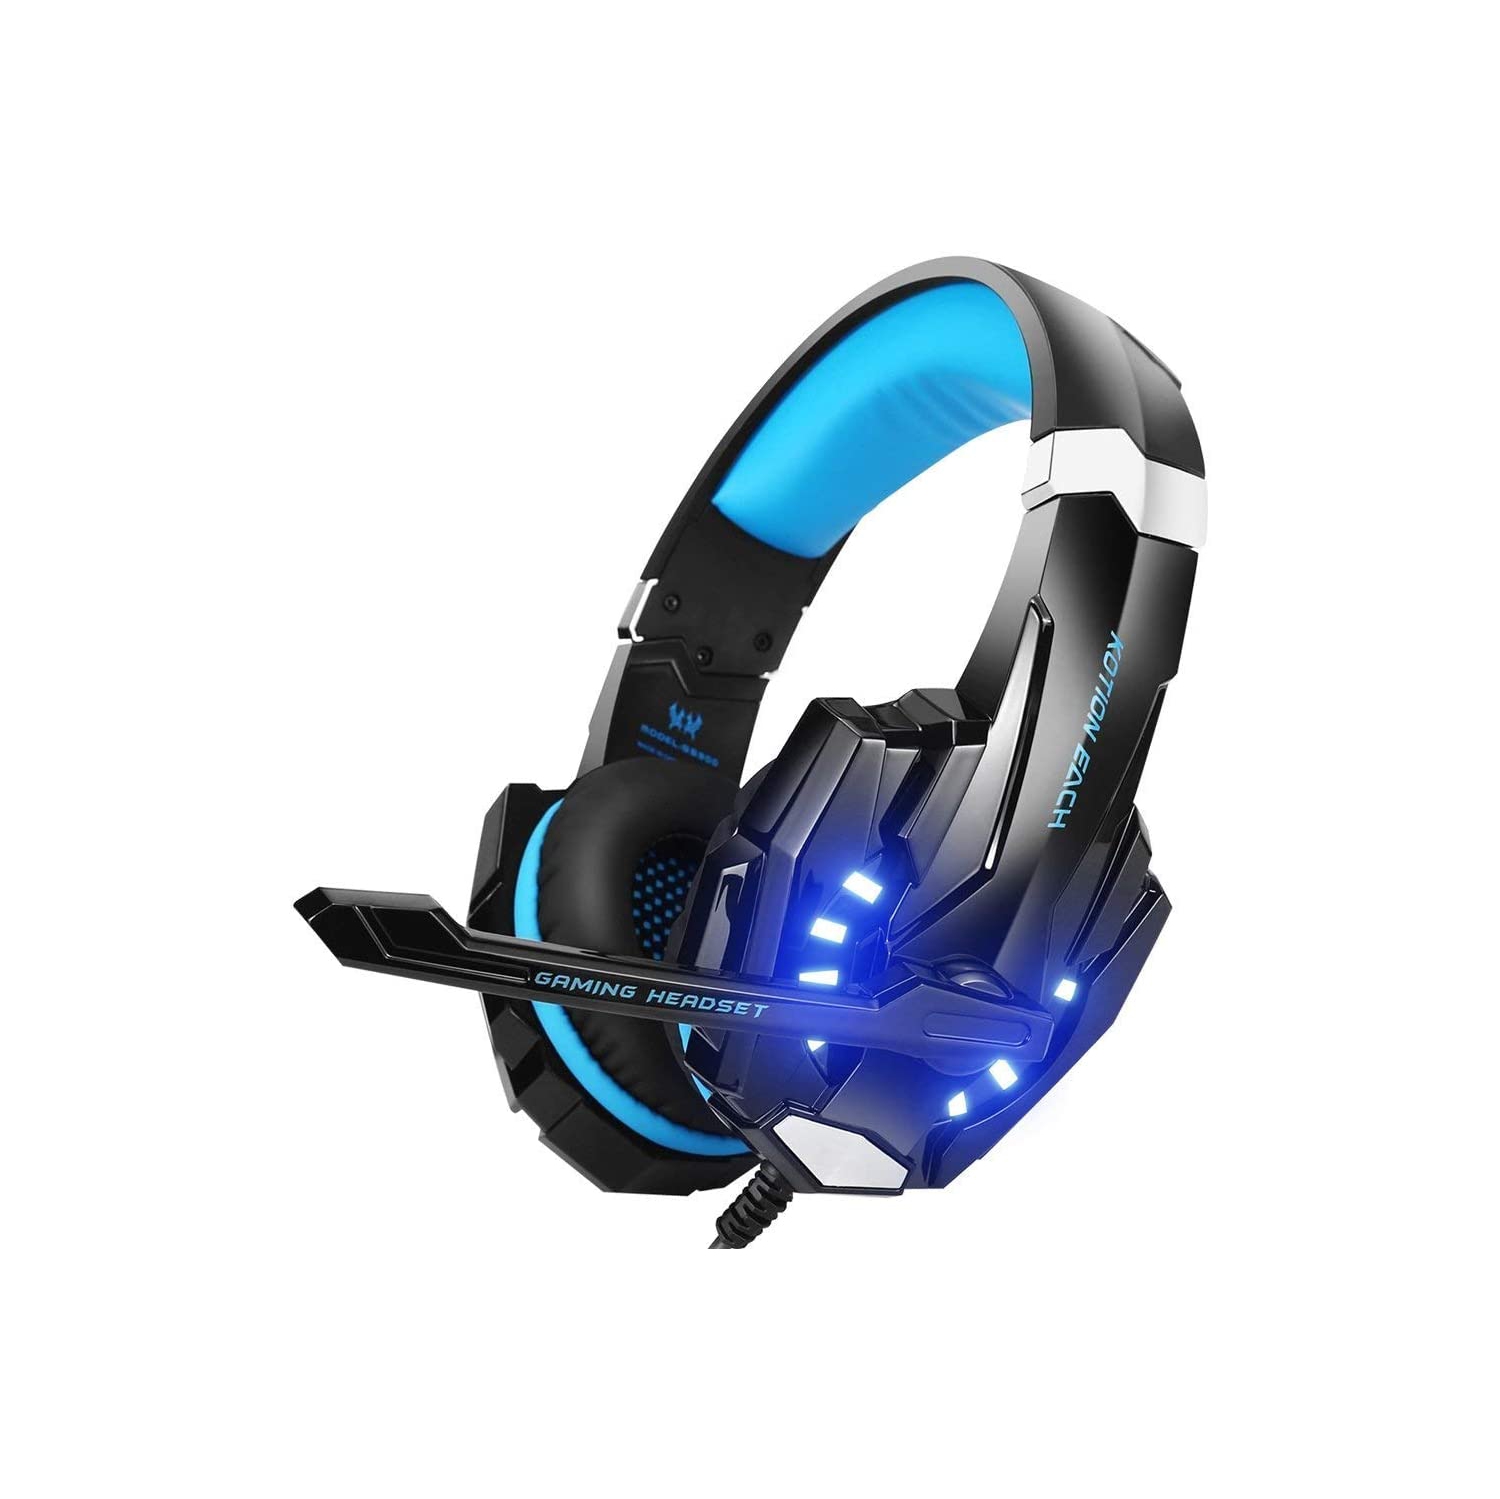 PC Gaming Headset Headphone for PlayStation 4 PS4 Xbox One Laptop Tablet Smartphone 3.5mm Stereo earphone with mic